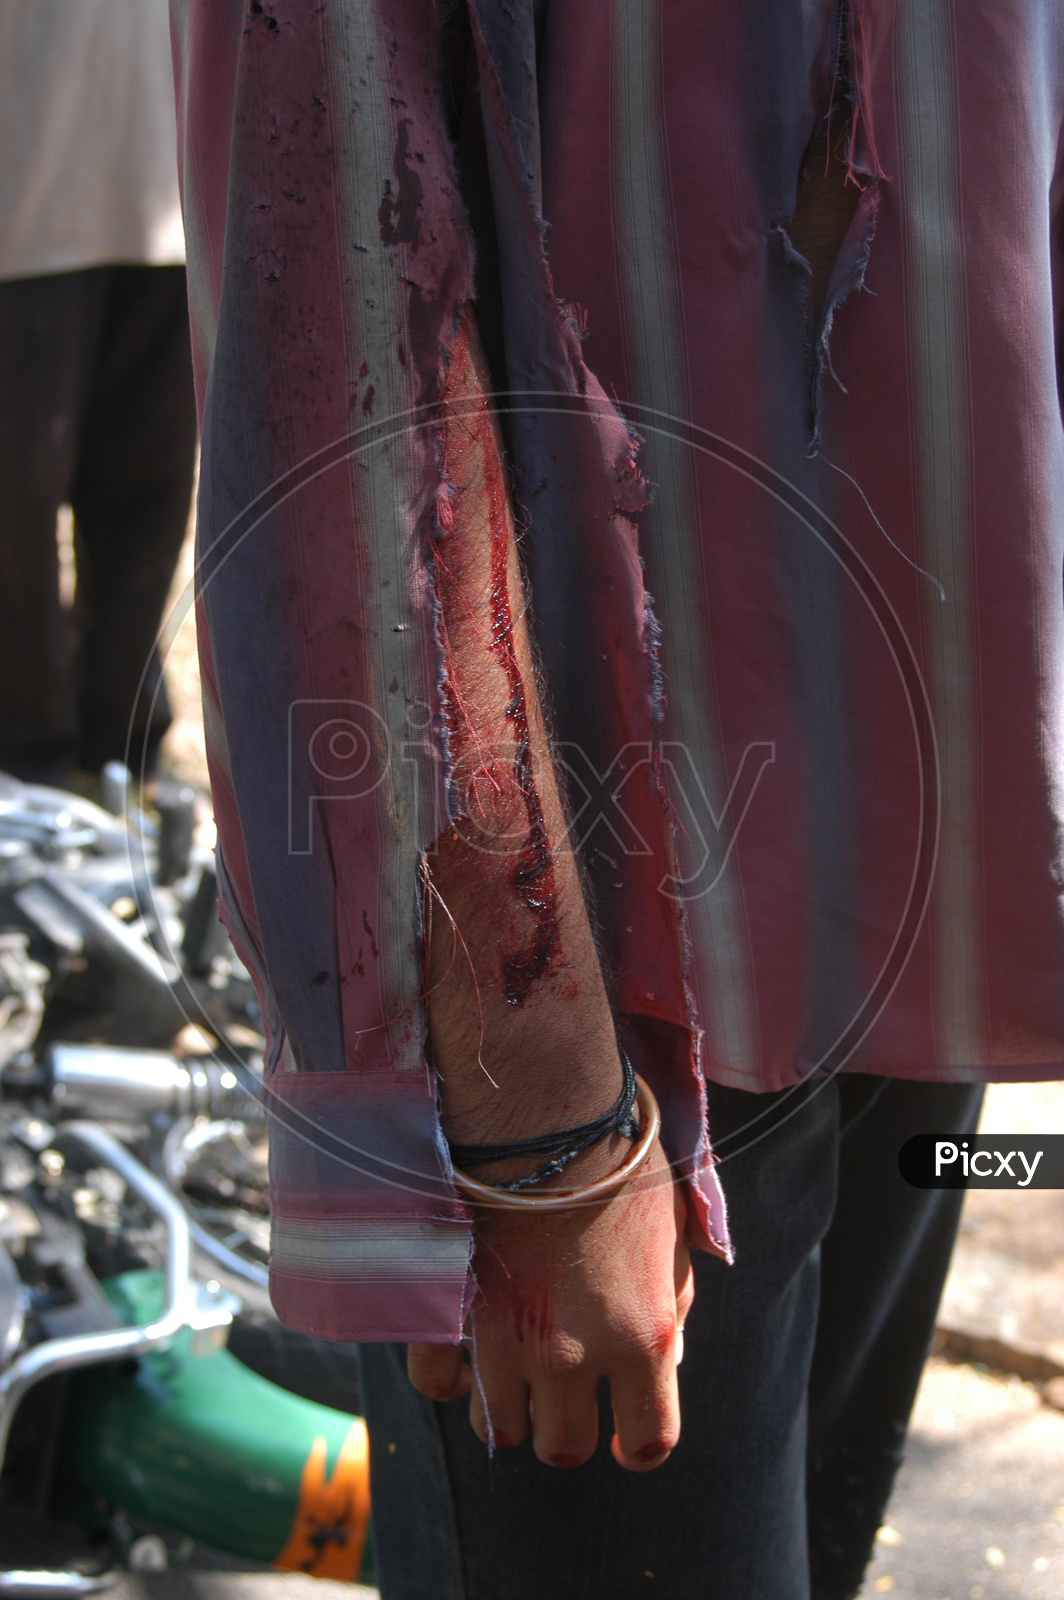 Man Hand With Wounds in a Movie Working Stills